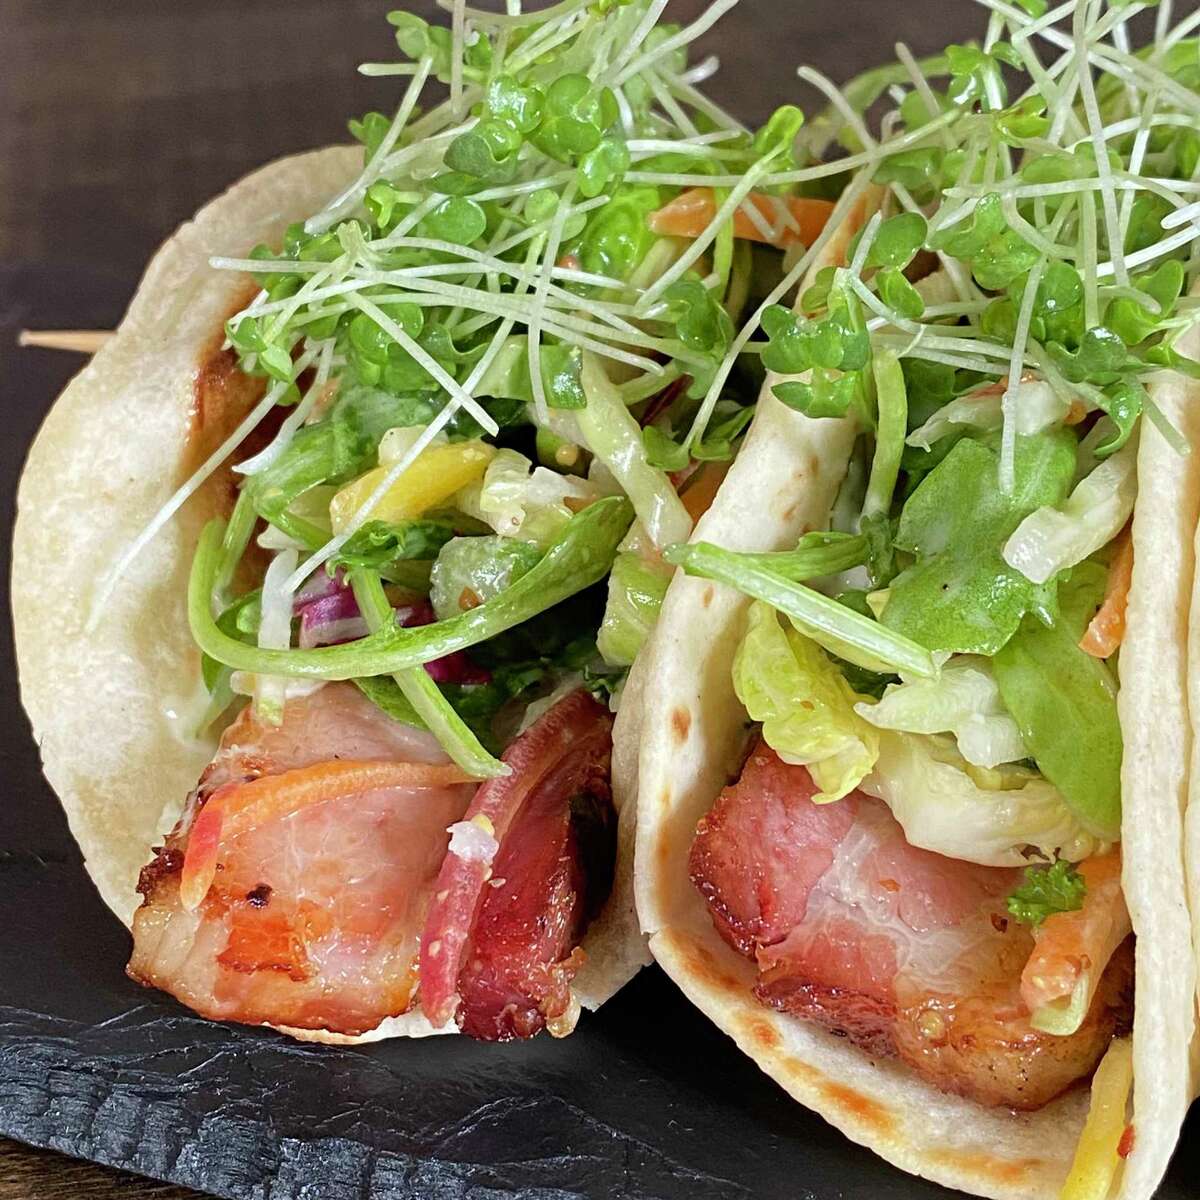 Braised Bacon Tacos are one of the small and share plate items from 1754 House’s menu.